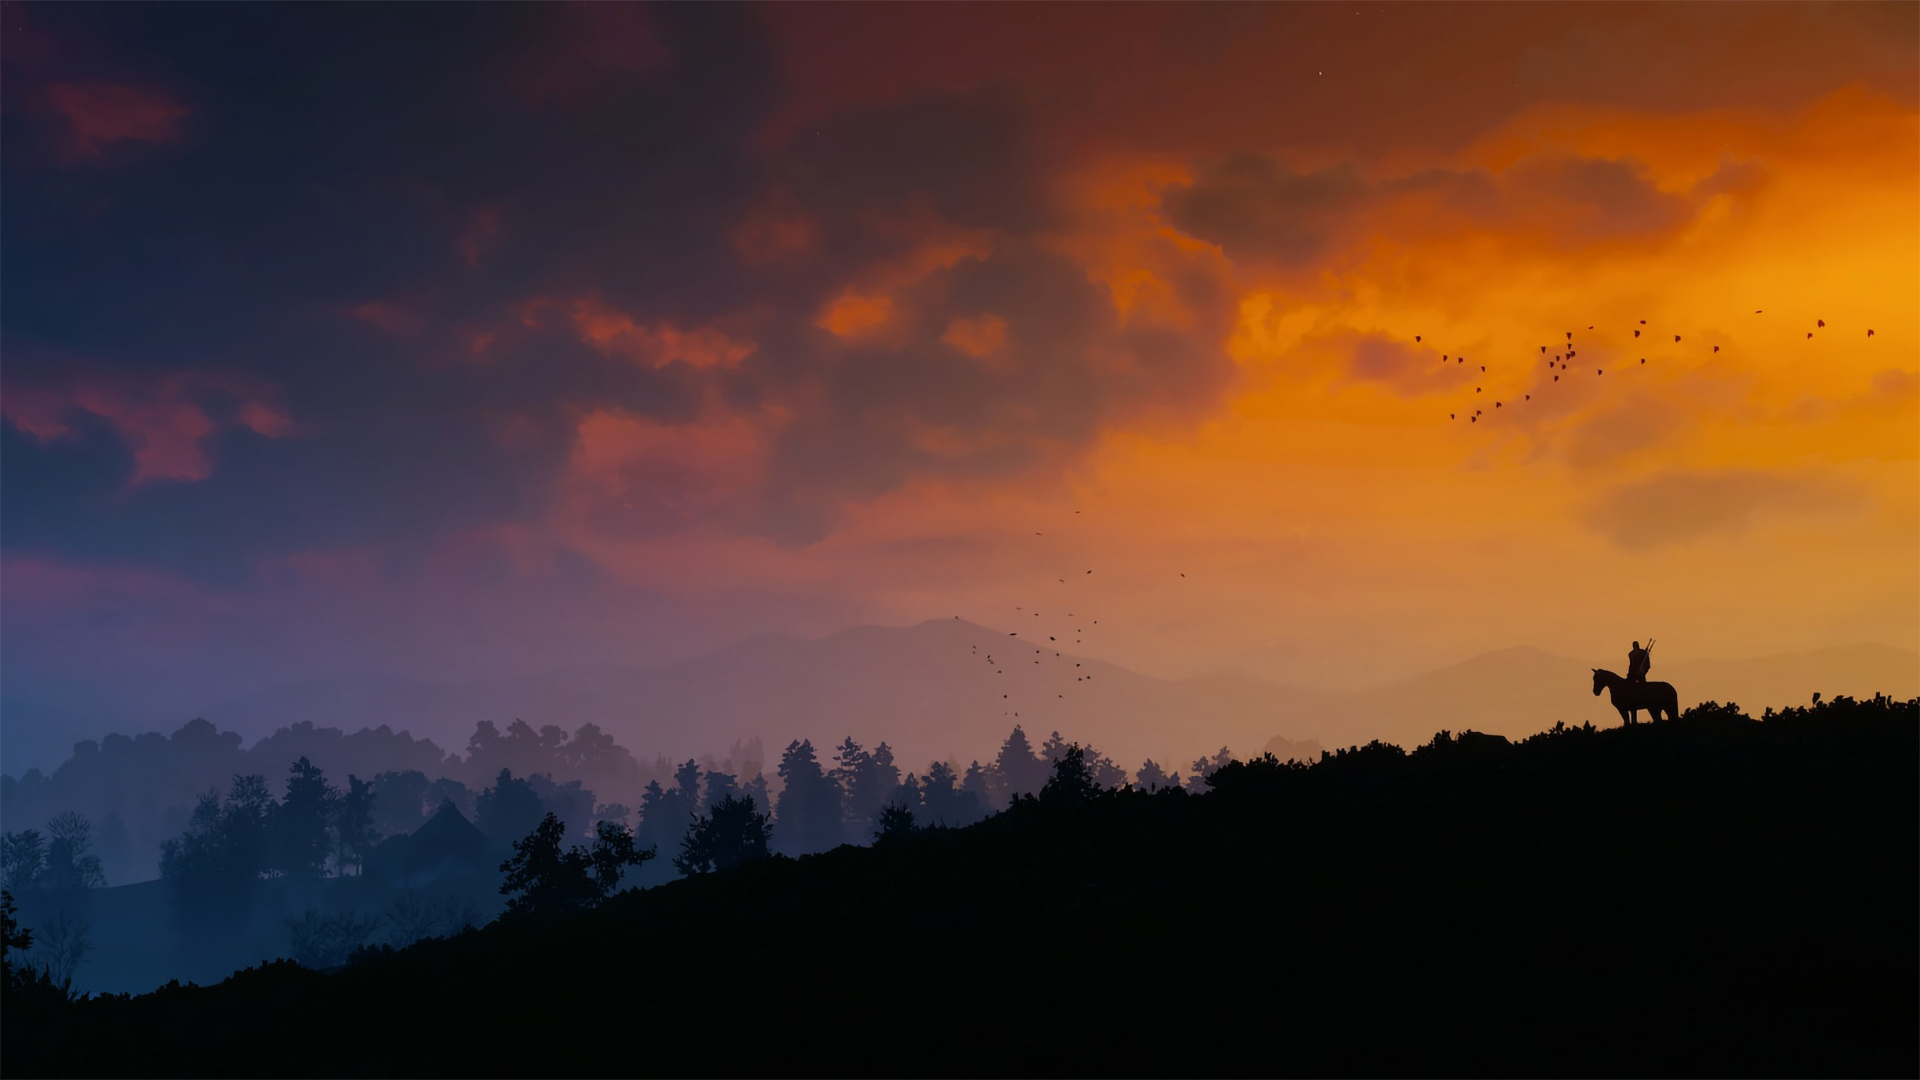 General 1920x1080 The Witcher The Witcher 3: Wild Hunt mountains sky nature landscape Geralt of Rivia horse